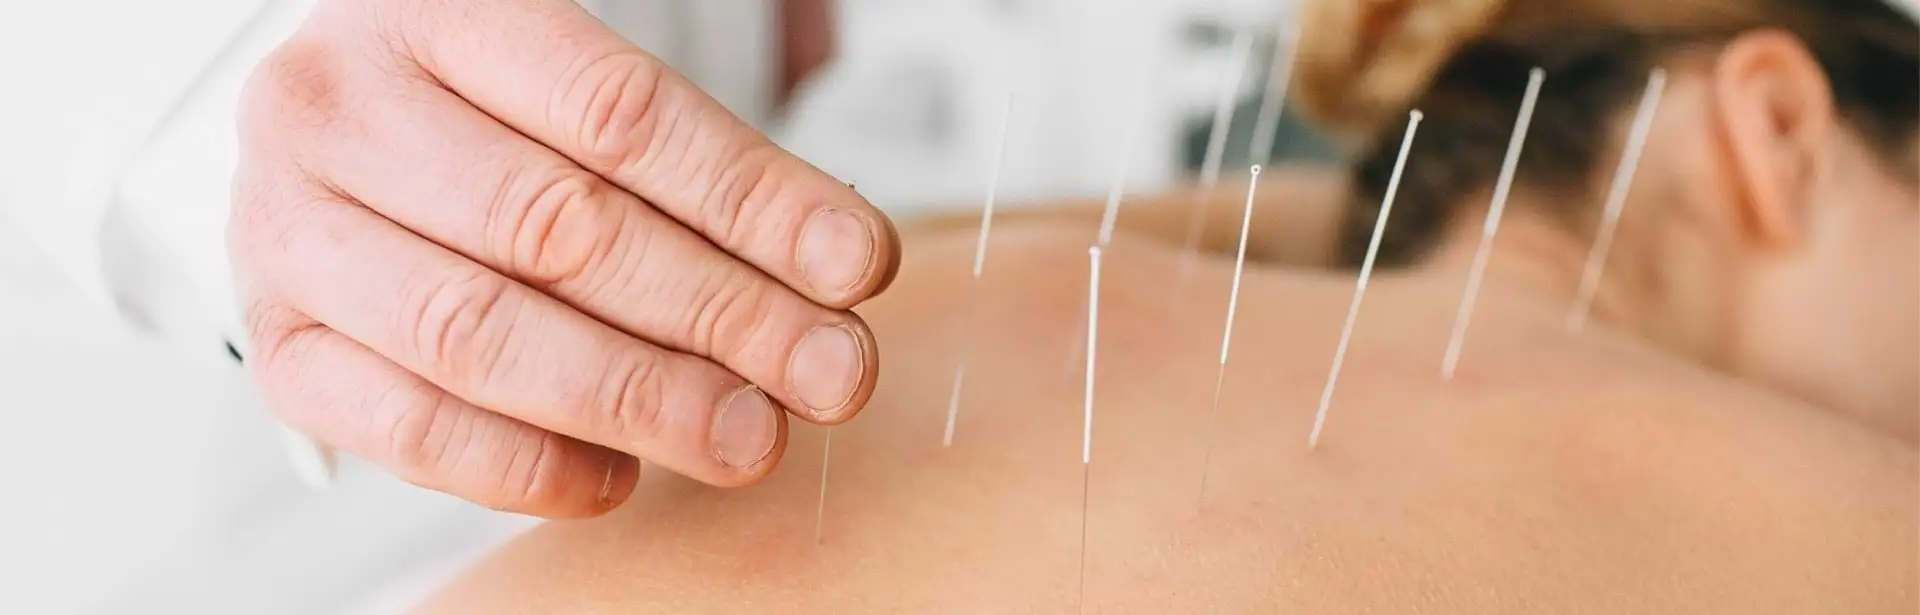 Acupuncture Services Downtown Toronto | Dundas University Health Clinic